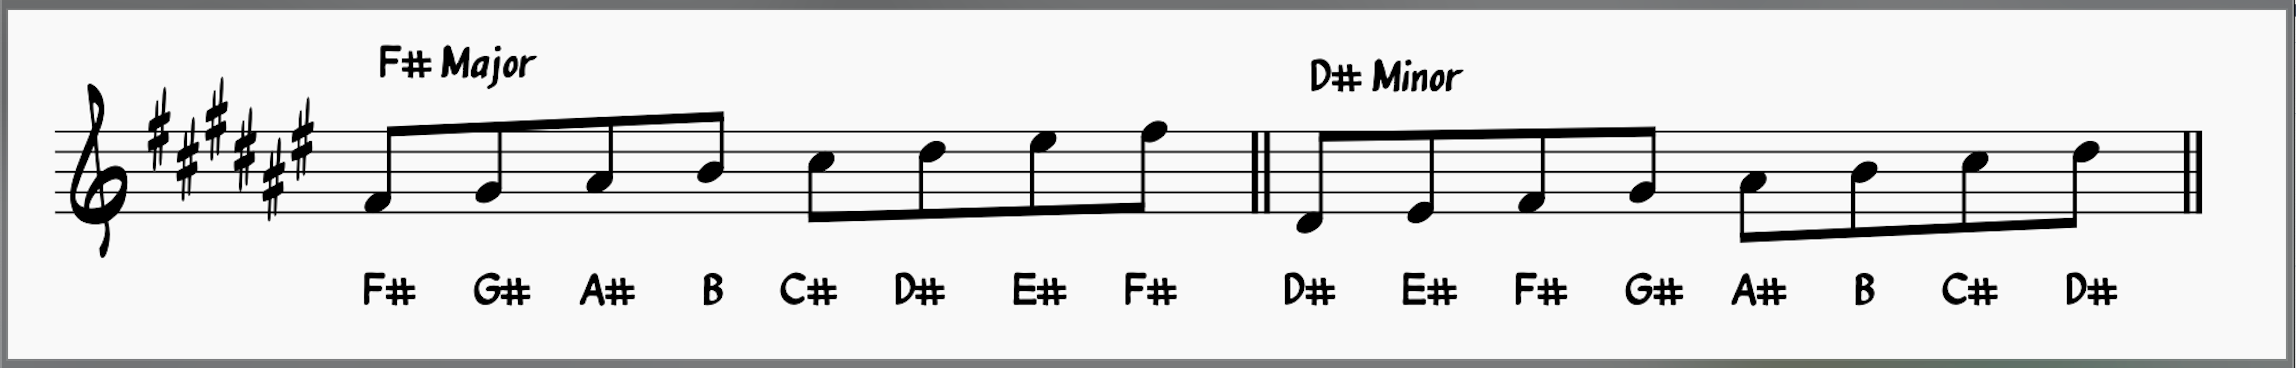 F# Major and D# Minor